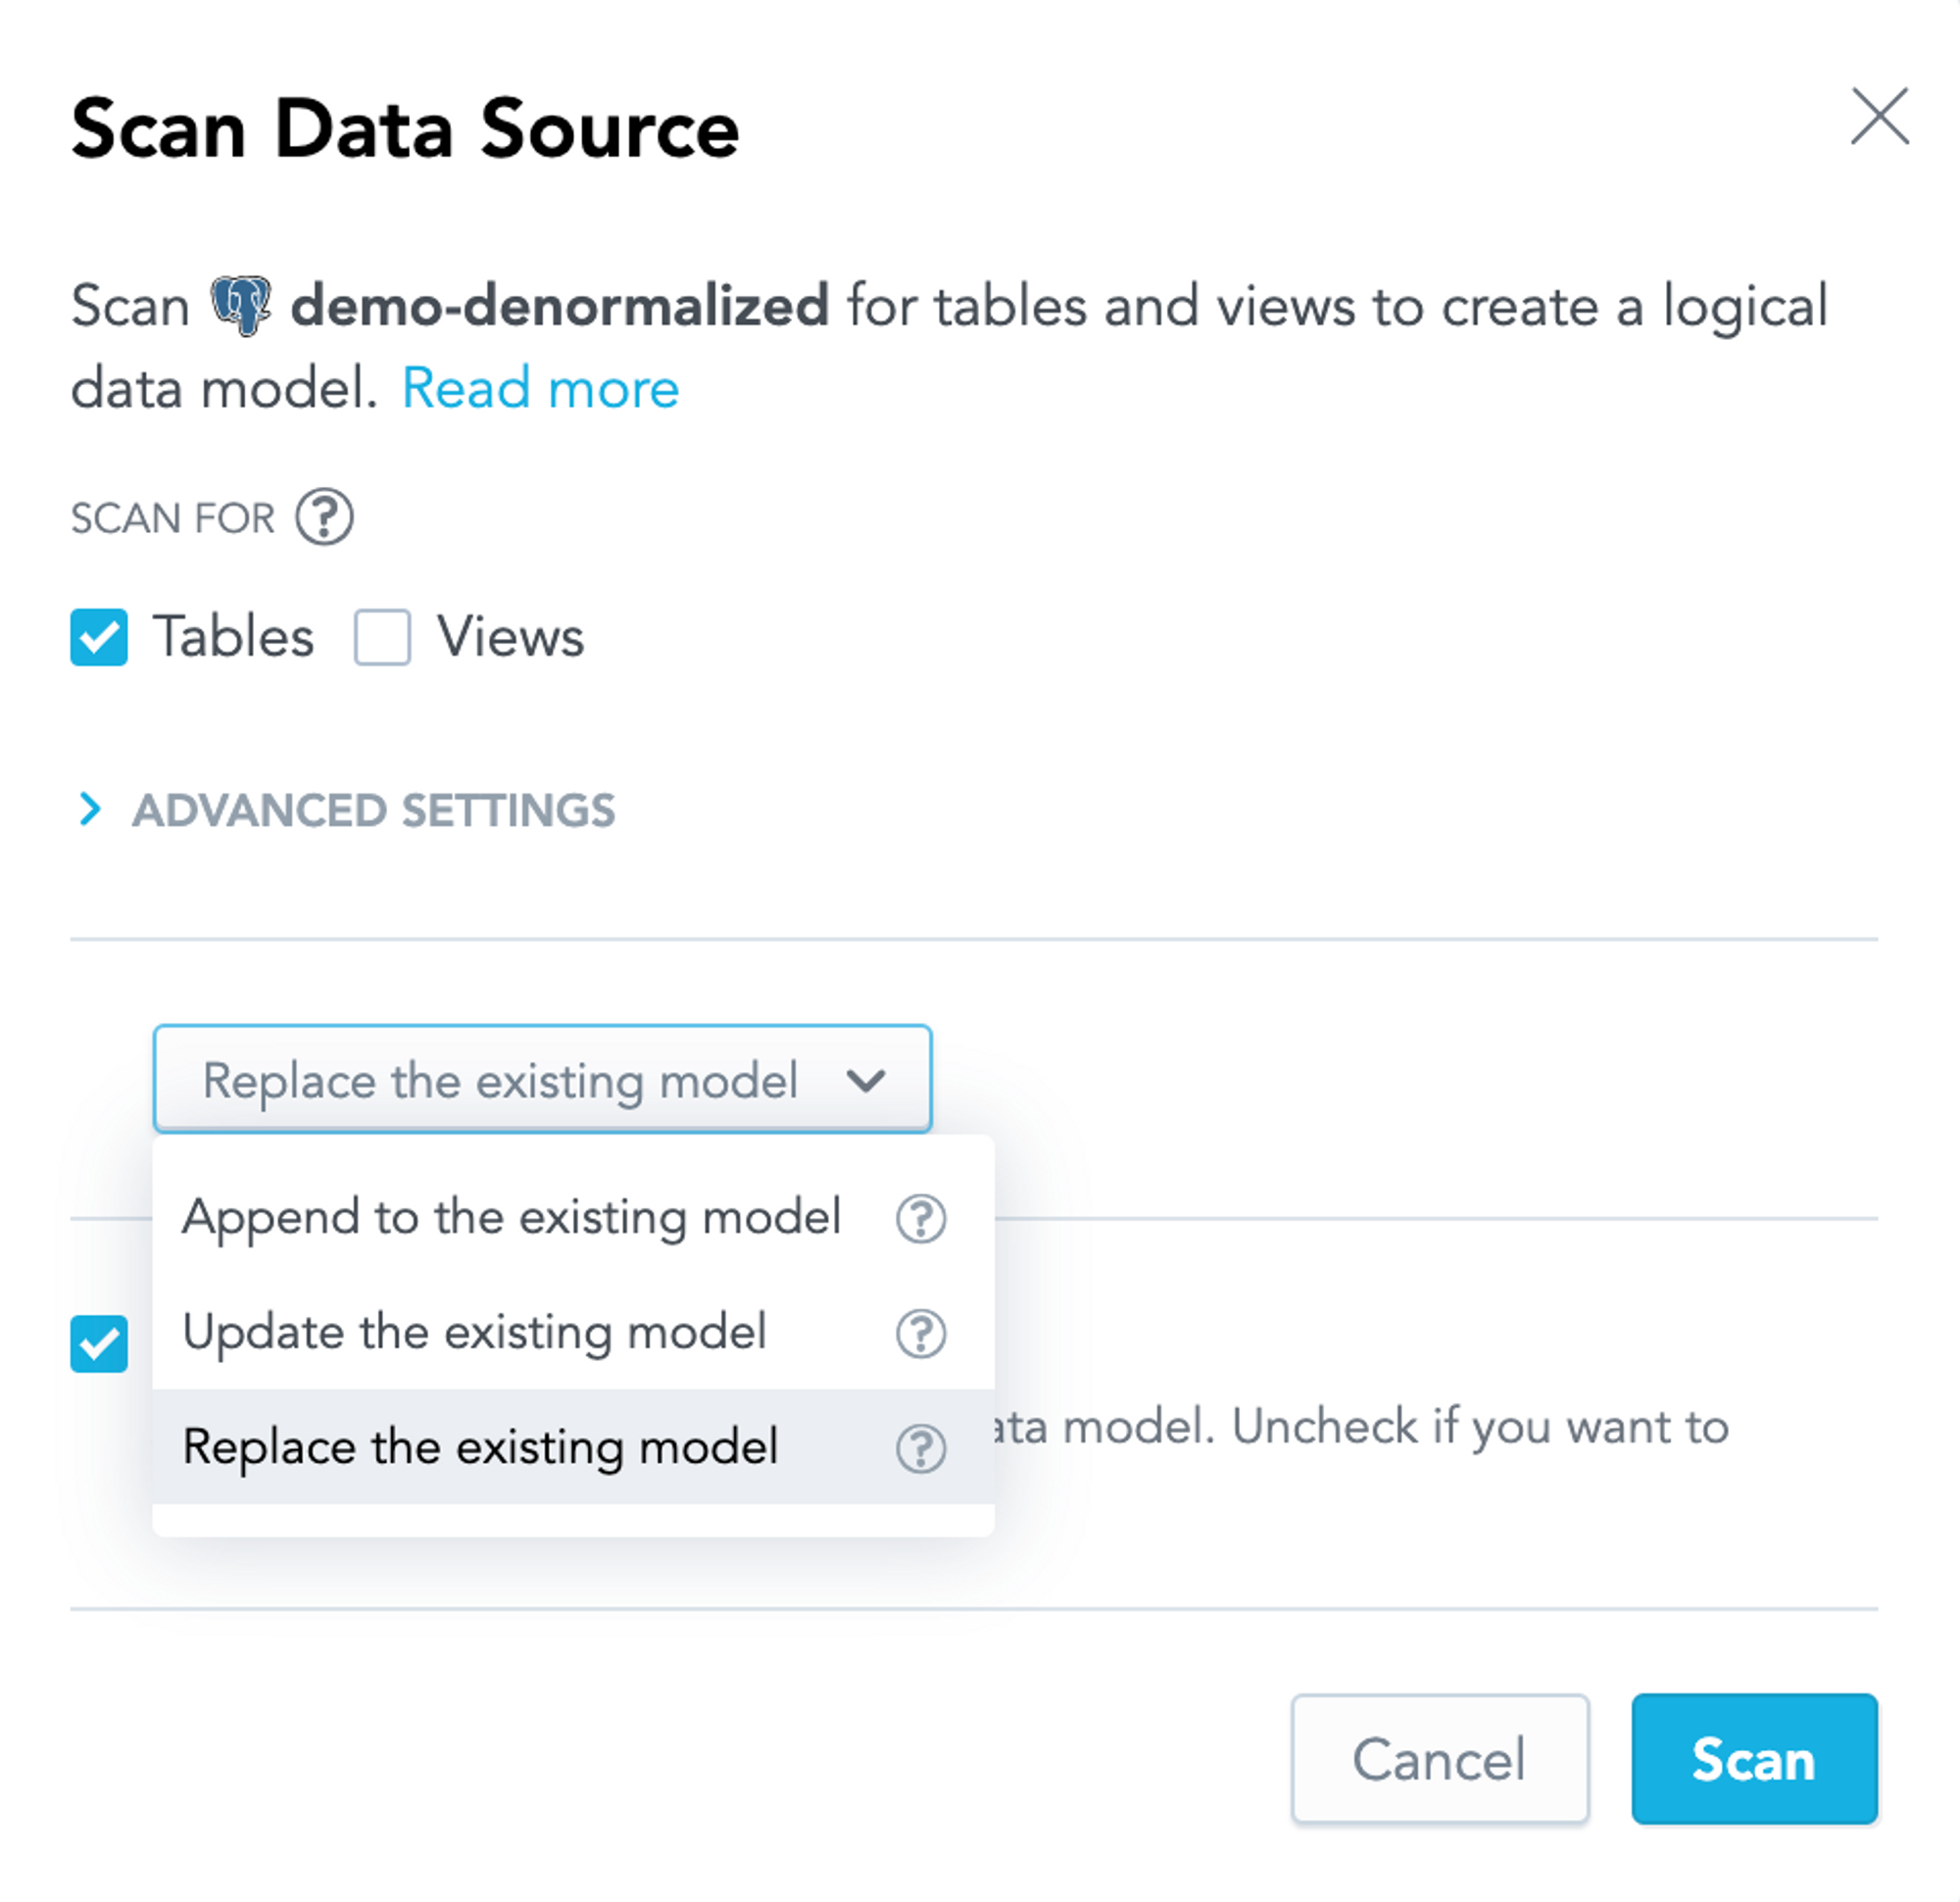 Scan the data source